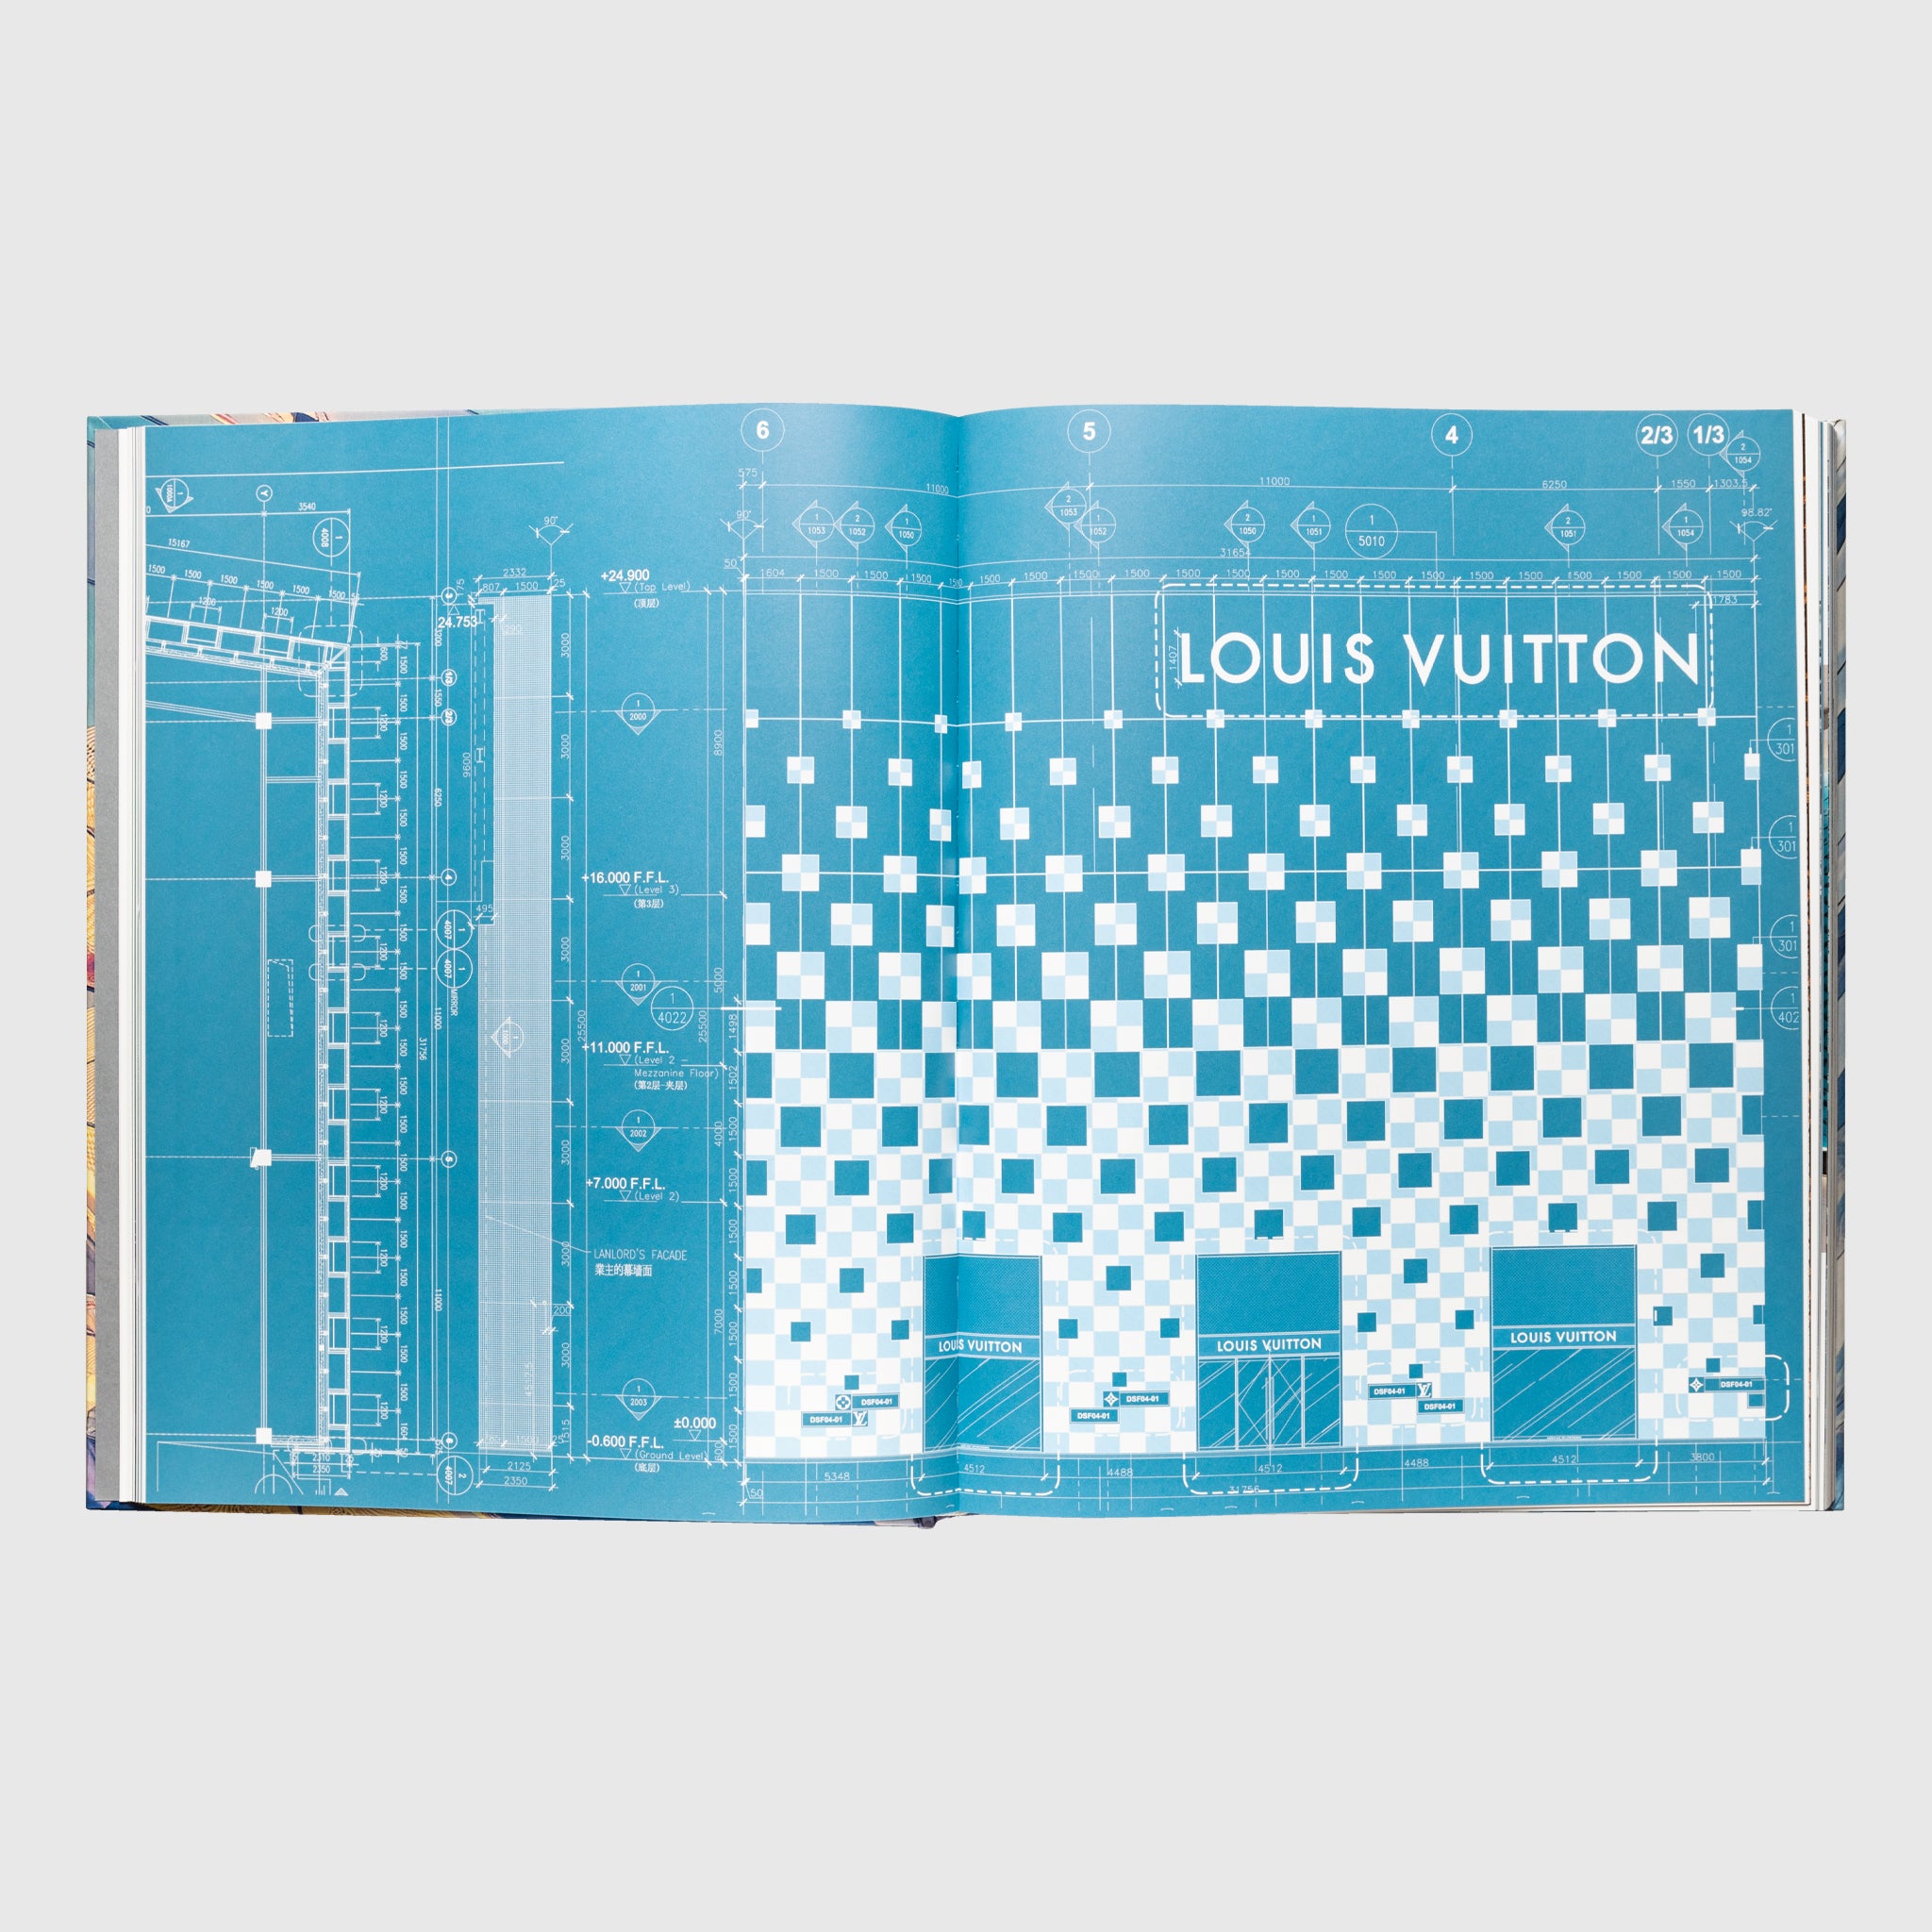 LOUIS VUITTON SKIN: ARCHITECTURE OF LUXURY (TOKYO EDITION) – PACKER SHOES